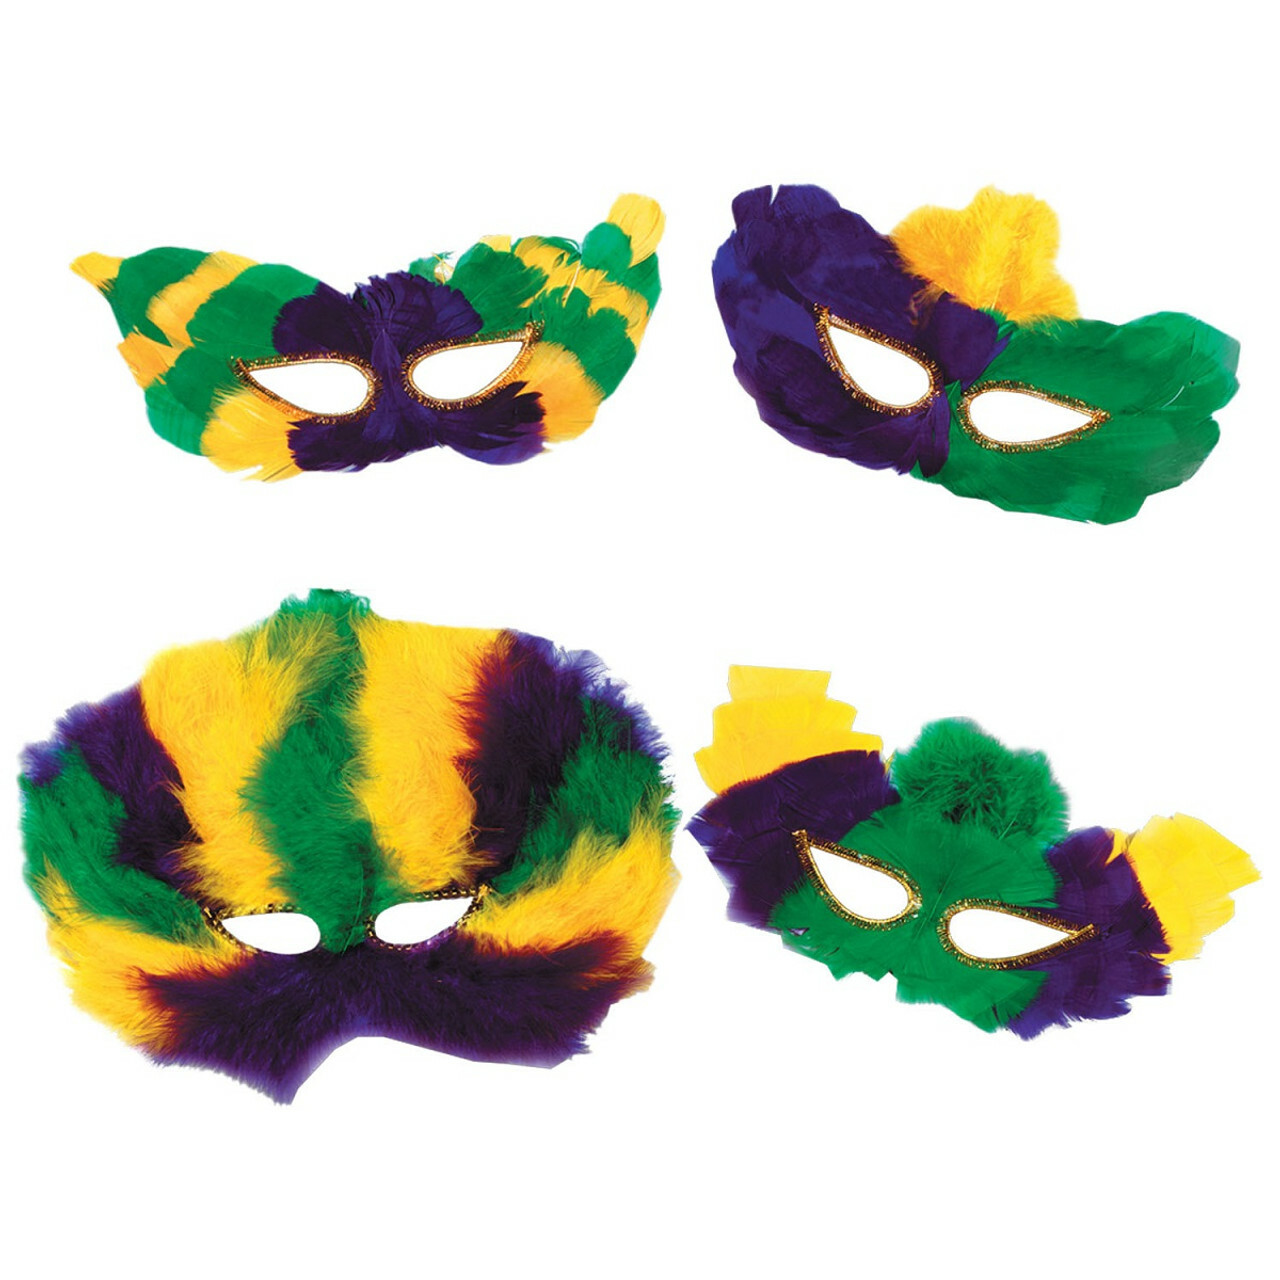 Pack of 12 yellow, purple and green feathered Mardi Gras masks in four styles